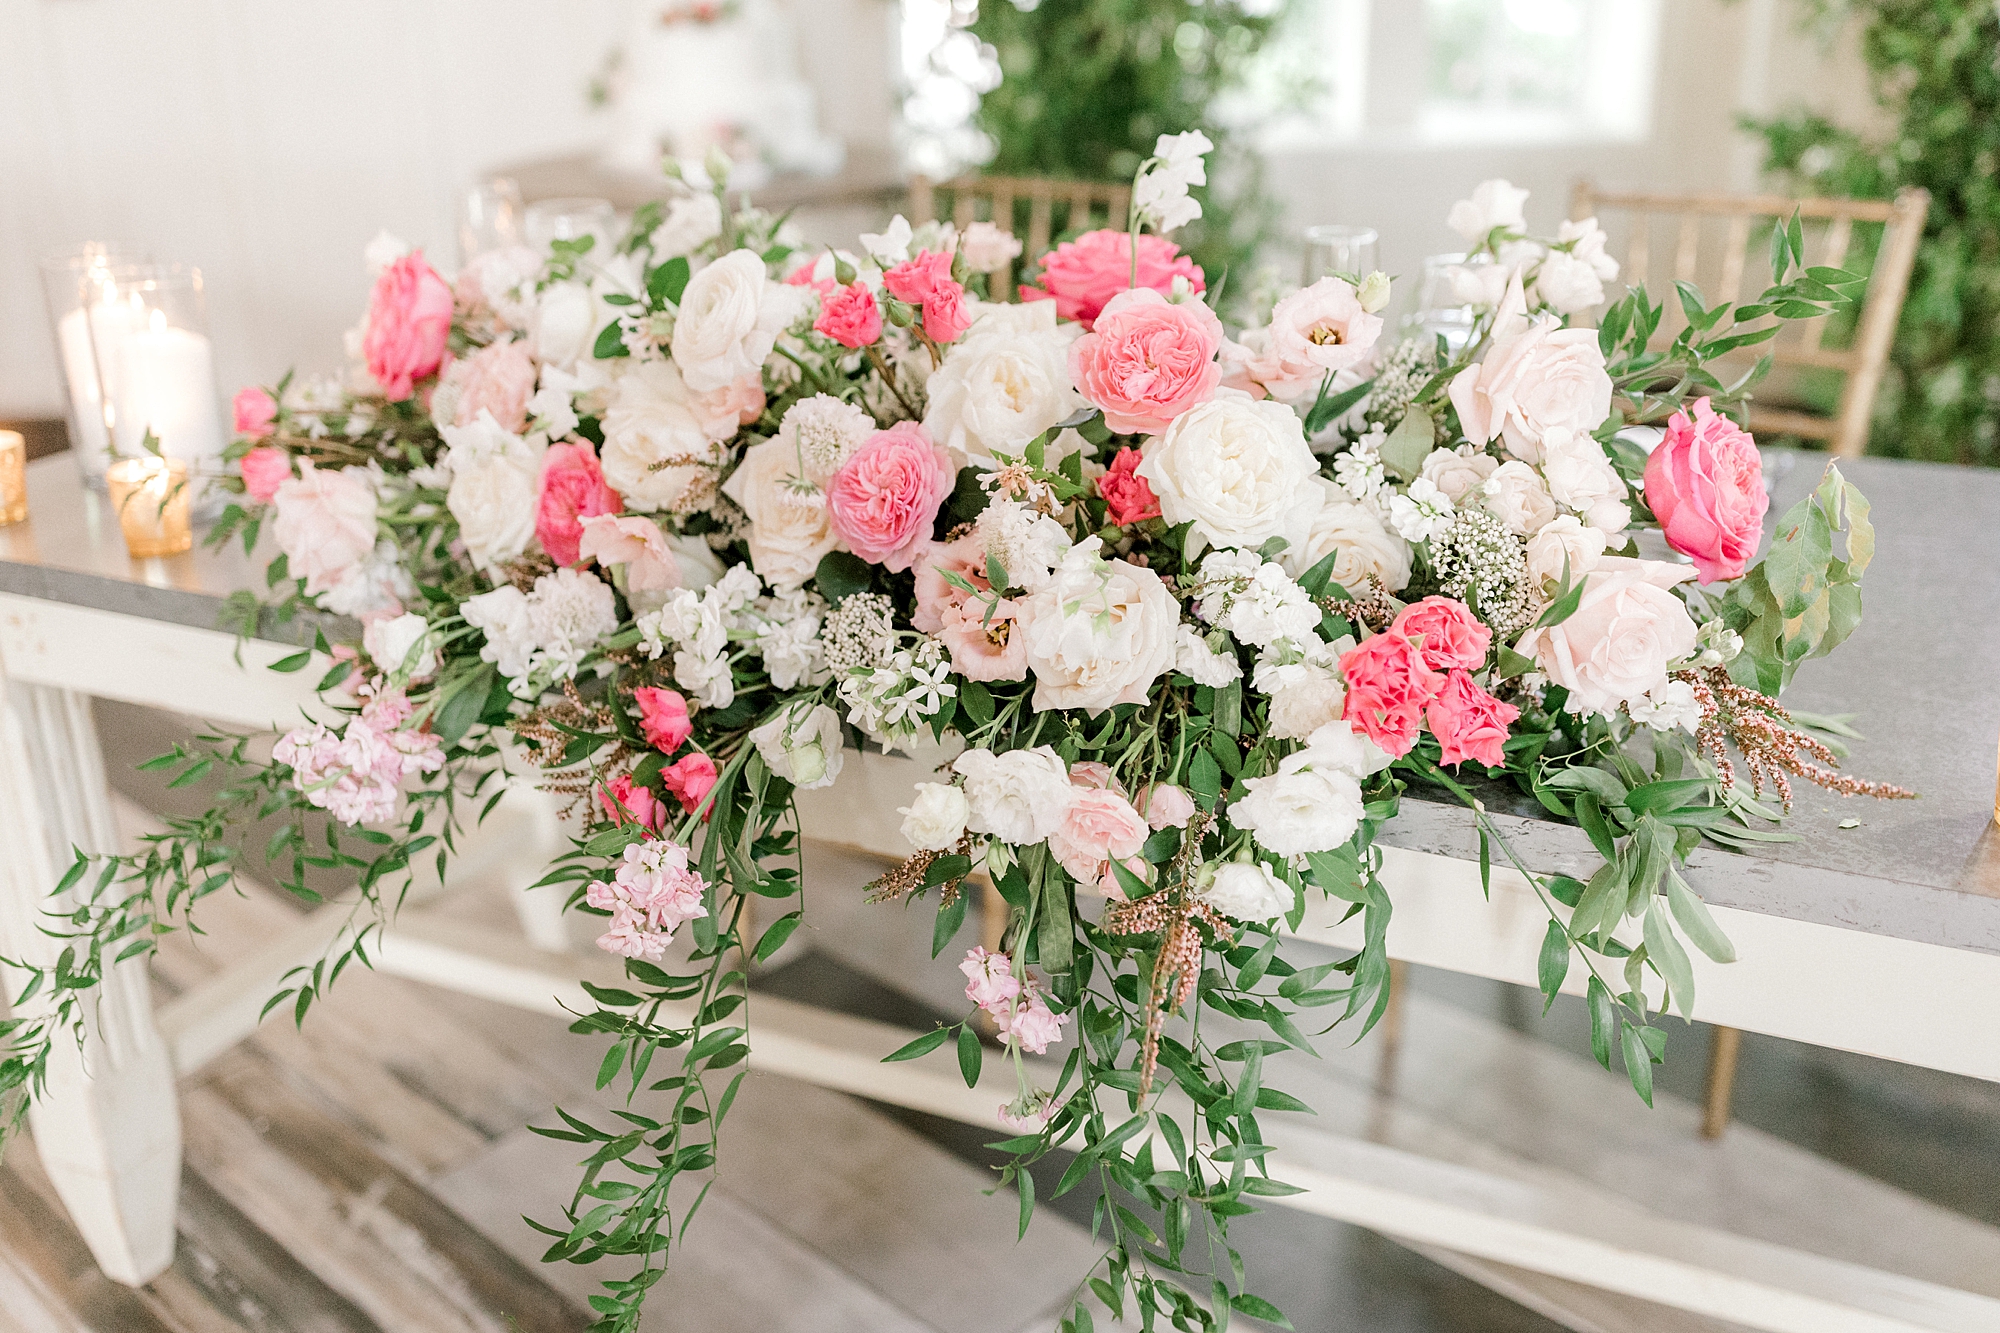 pink and white floral arrangement sits on edge of white table